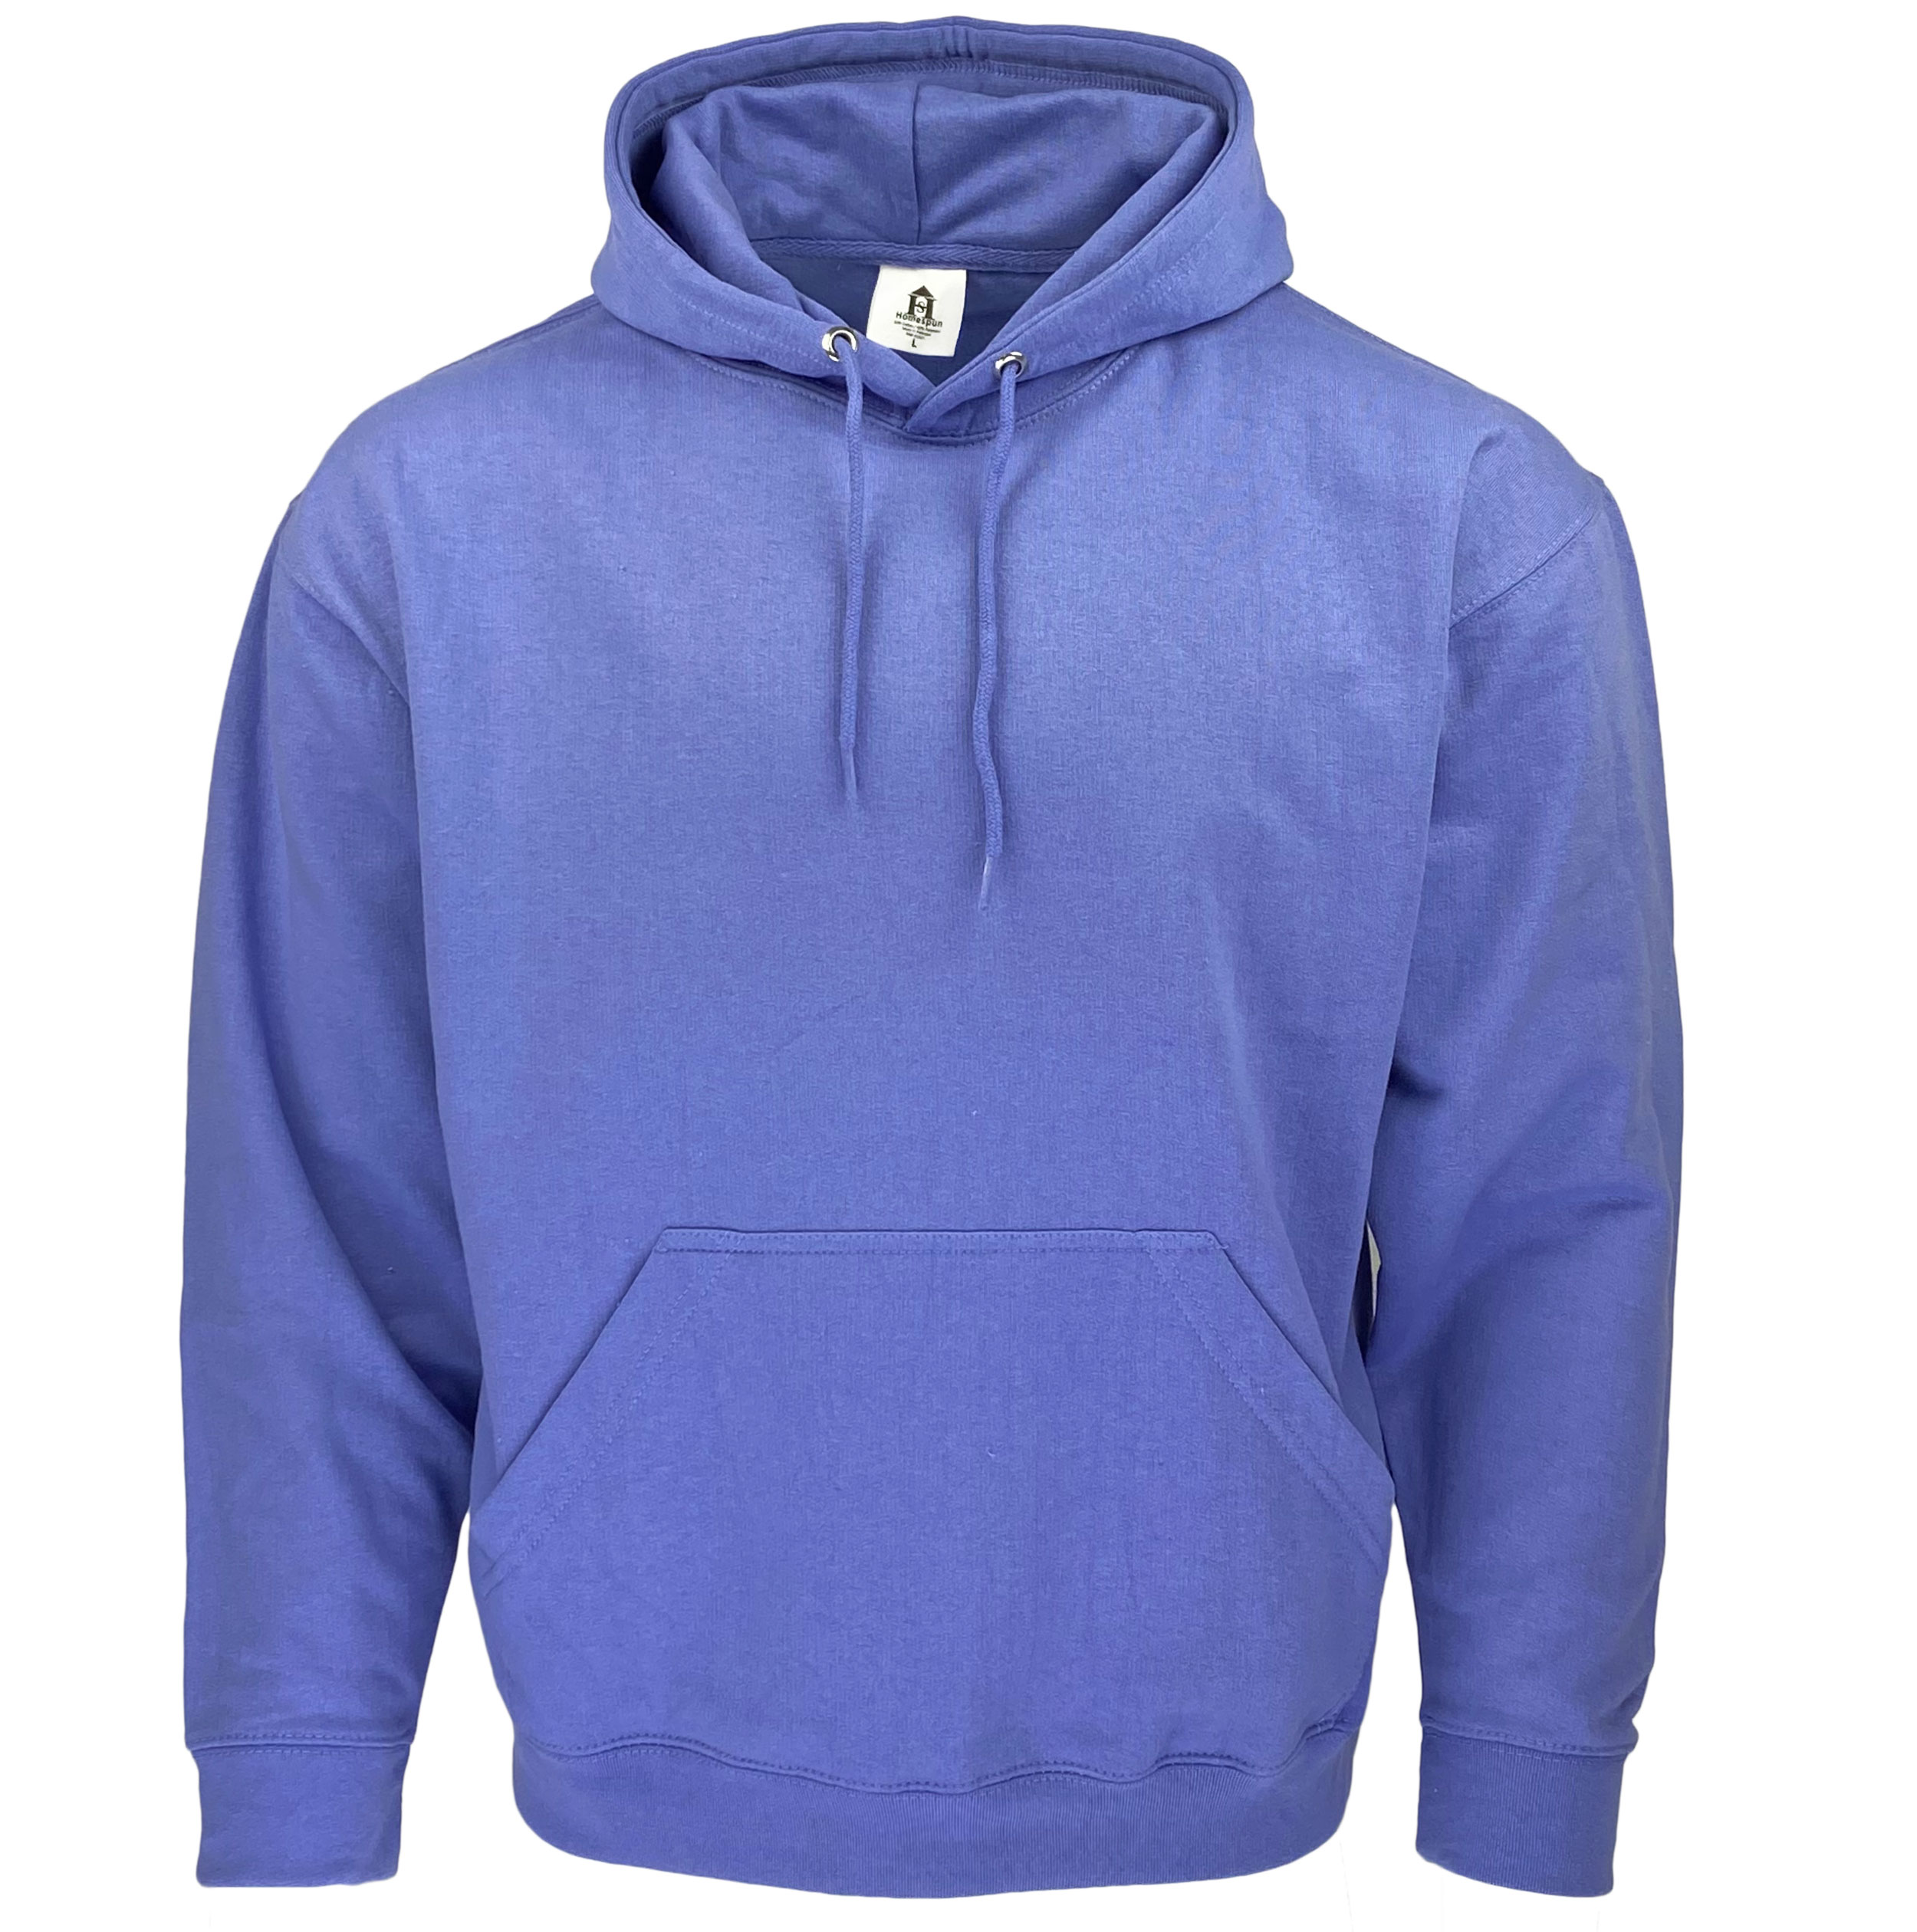 Style H14VL | Wholesale First Quality Premium Fleece Pullover Hoodies ...